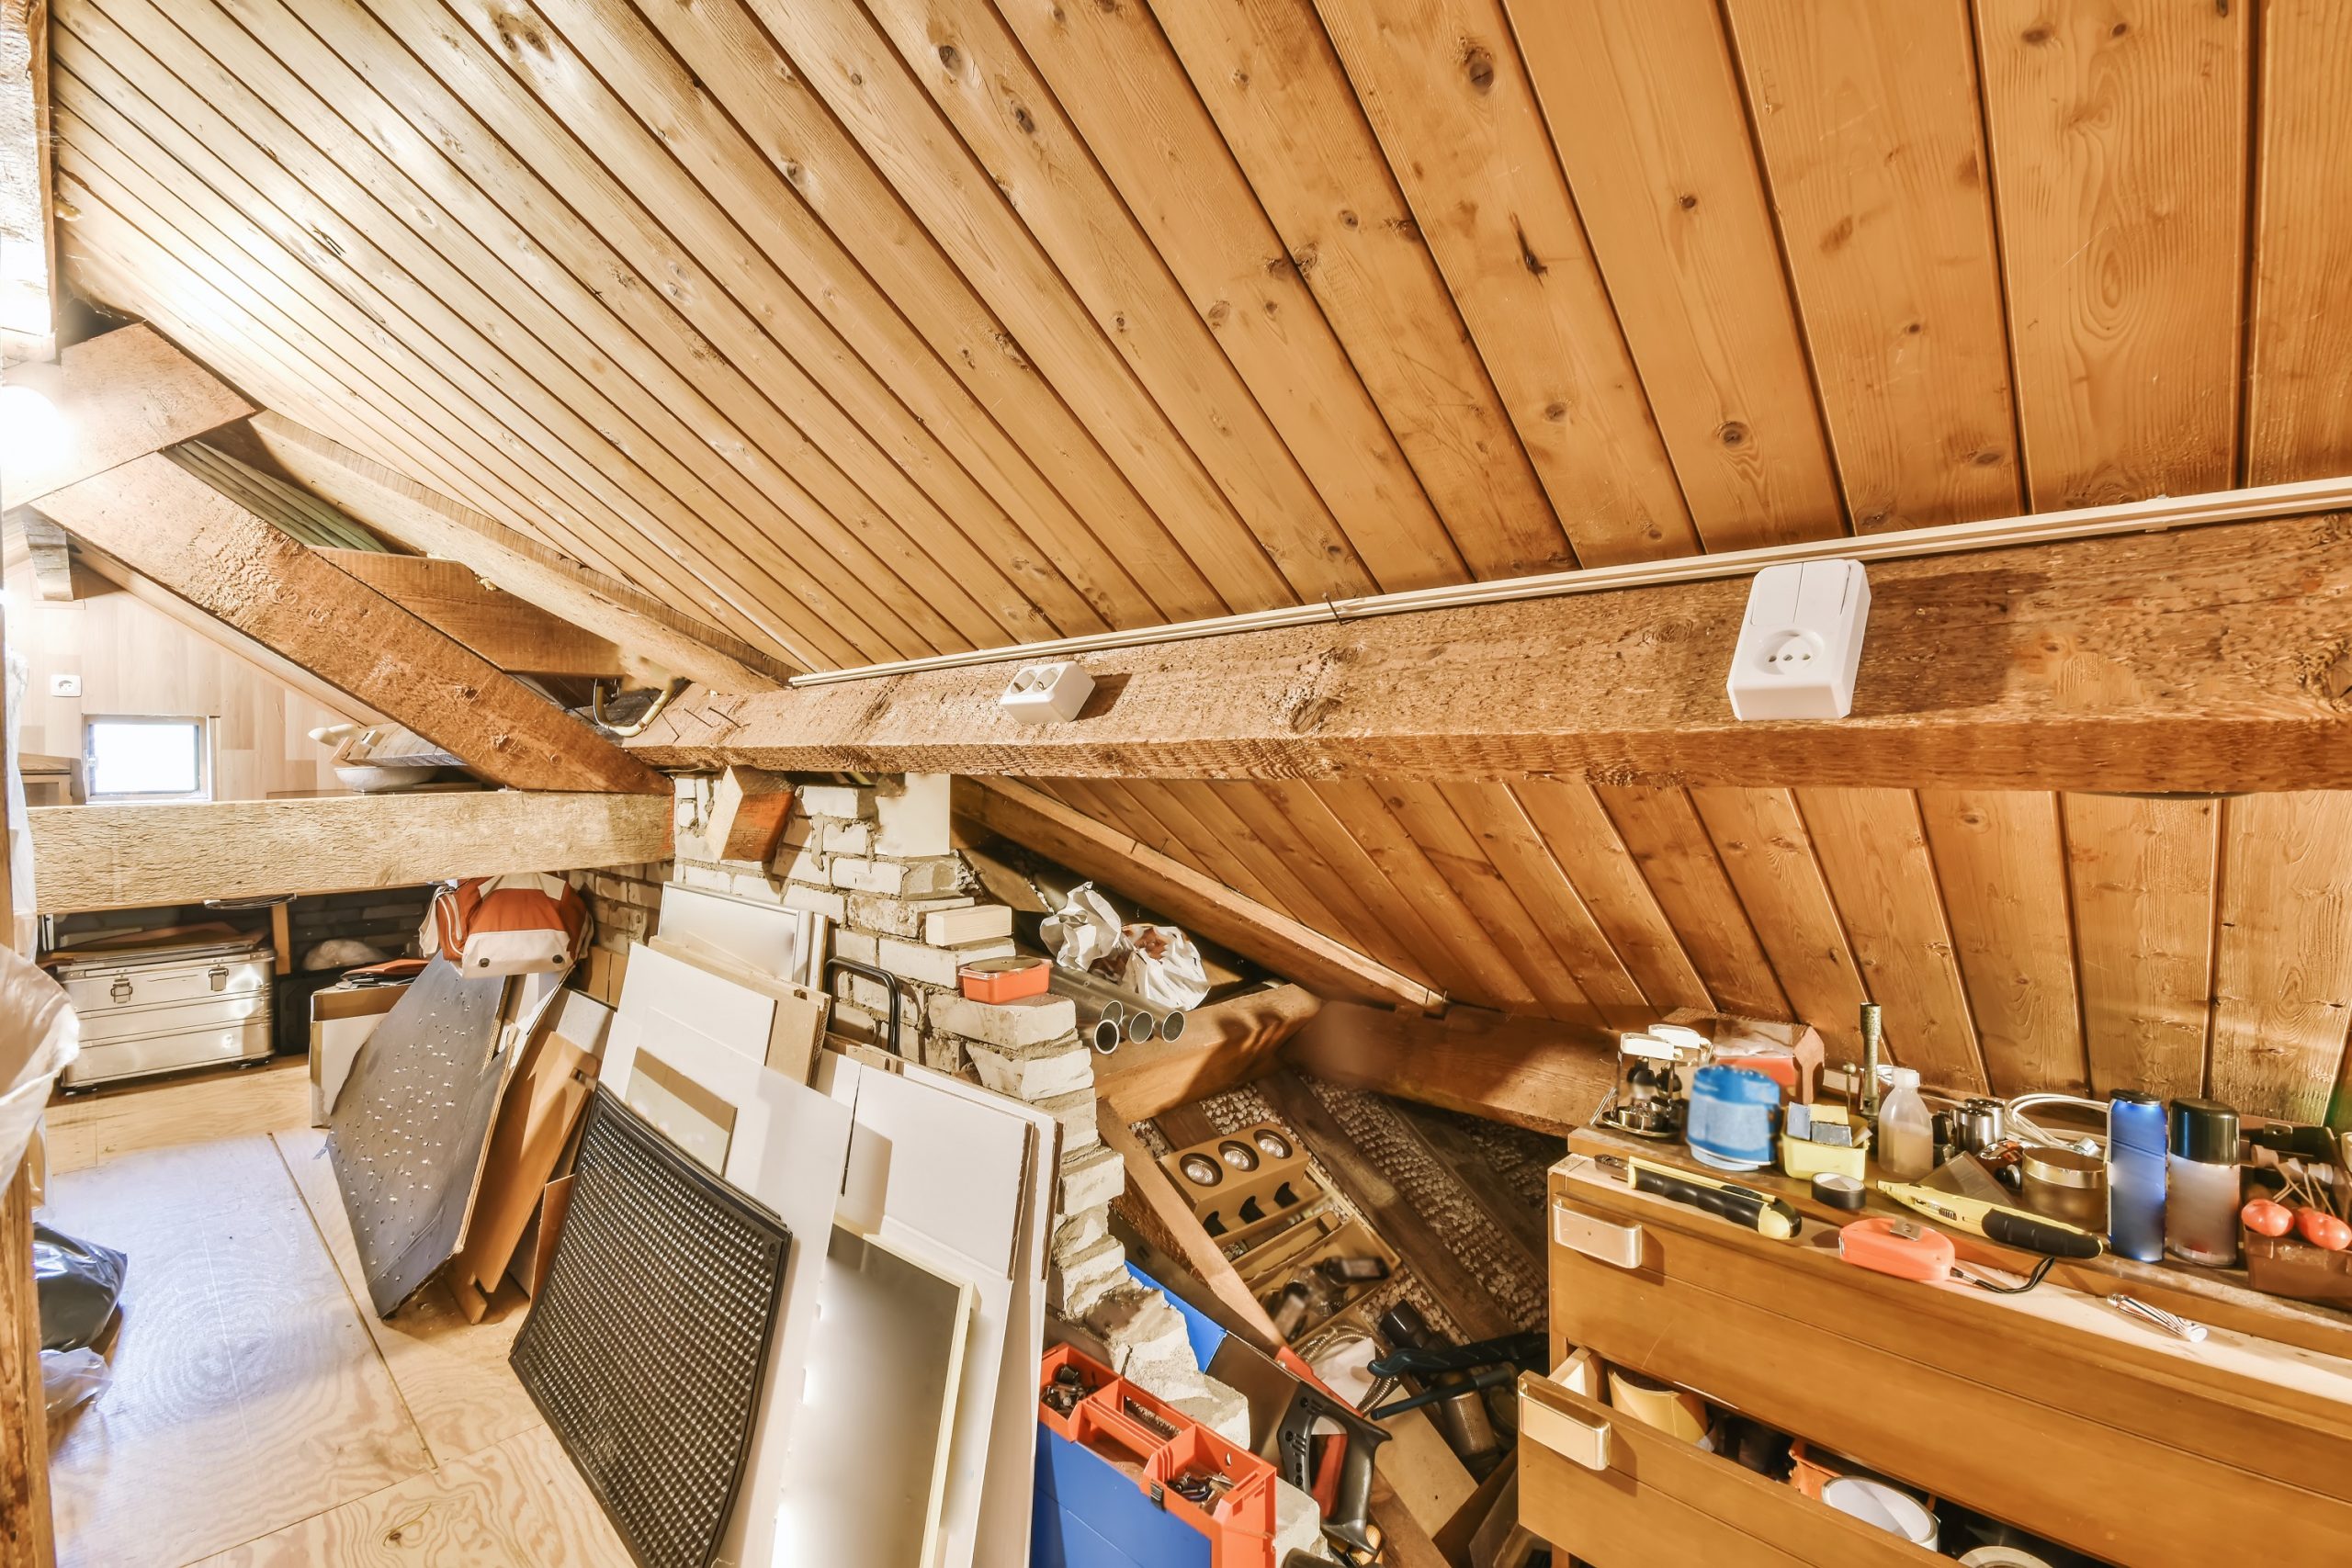 Reasons Why You Need Insulation Removal on Your Attic